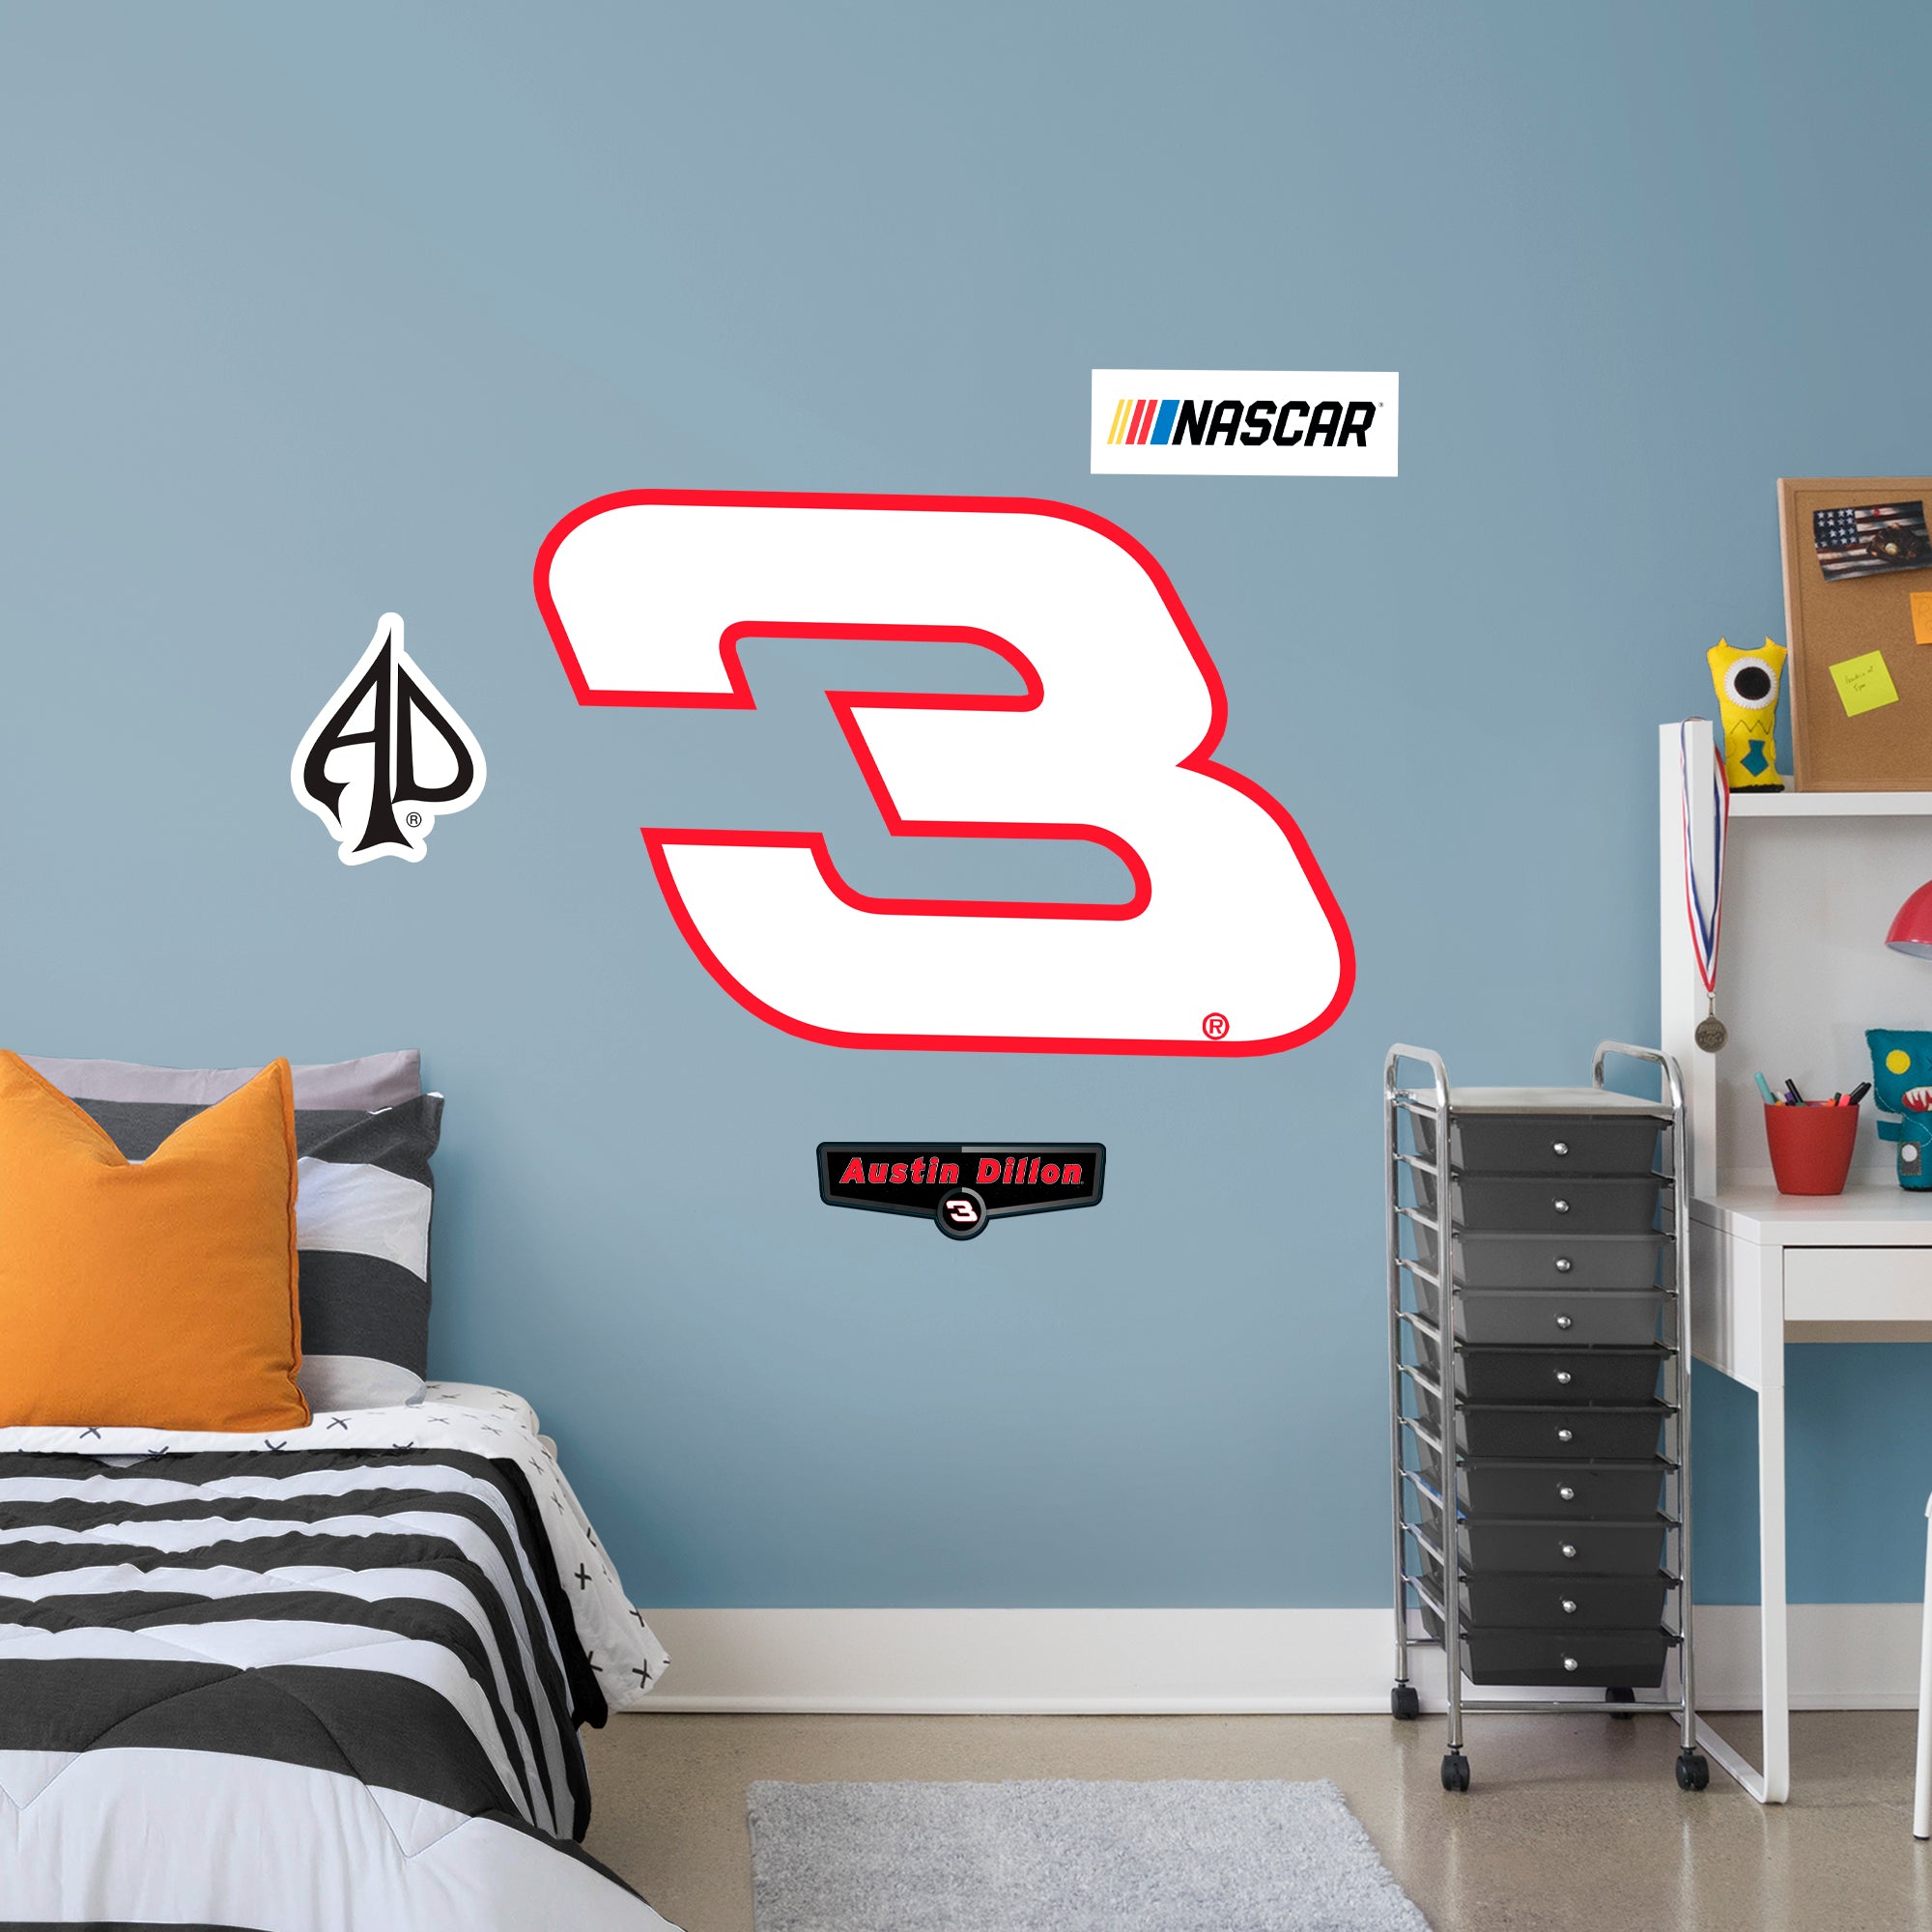 Austin Dillon 2021 #3 Logo - Officially Licensed NASCAR Removable Wall Decal Giant Logo + 3 Decals (45"W x 30"H) by Fathead | Vi